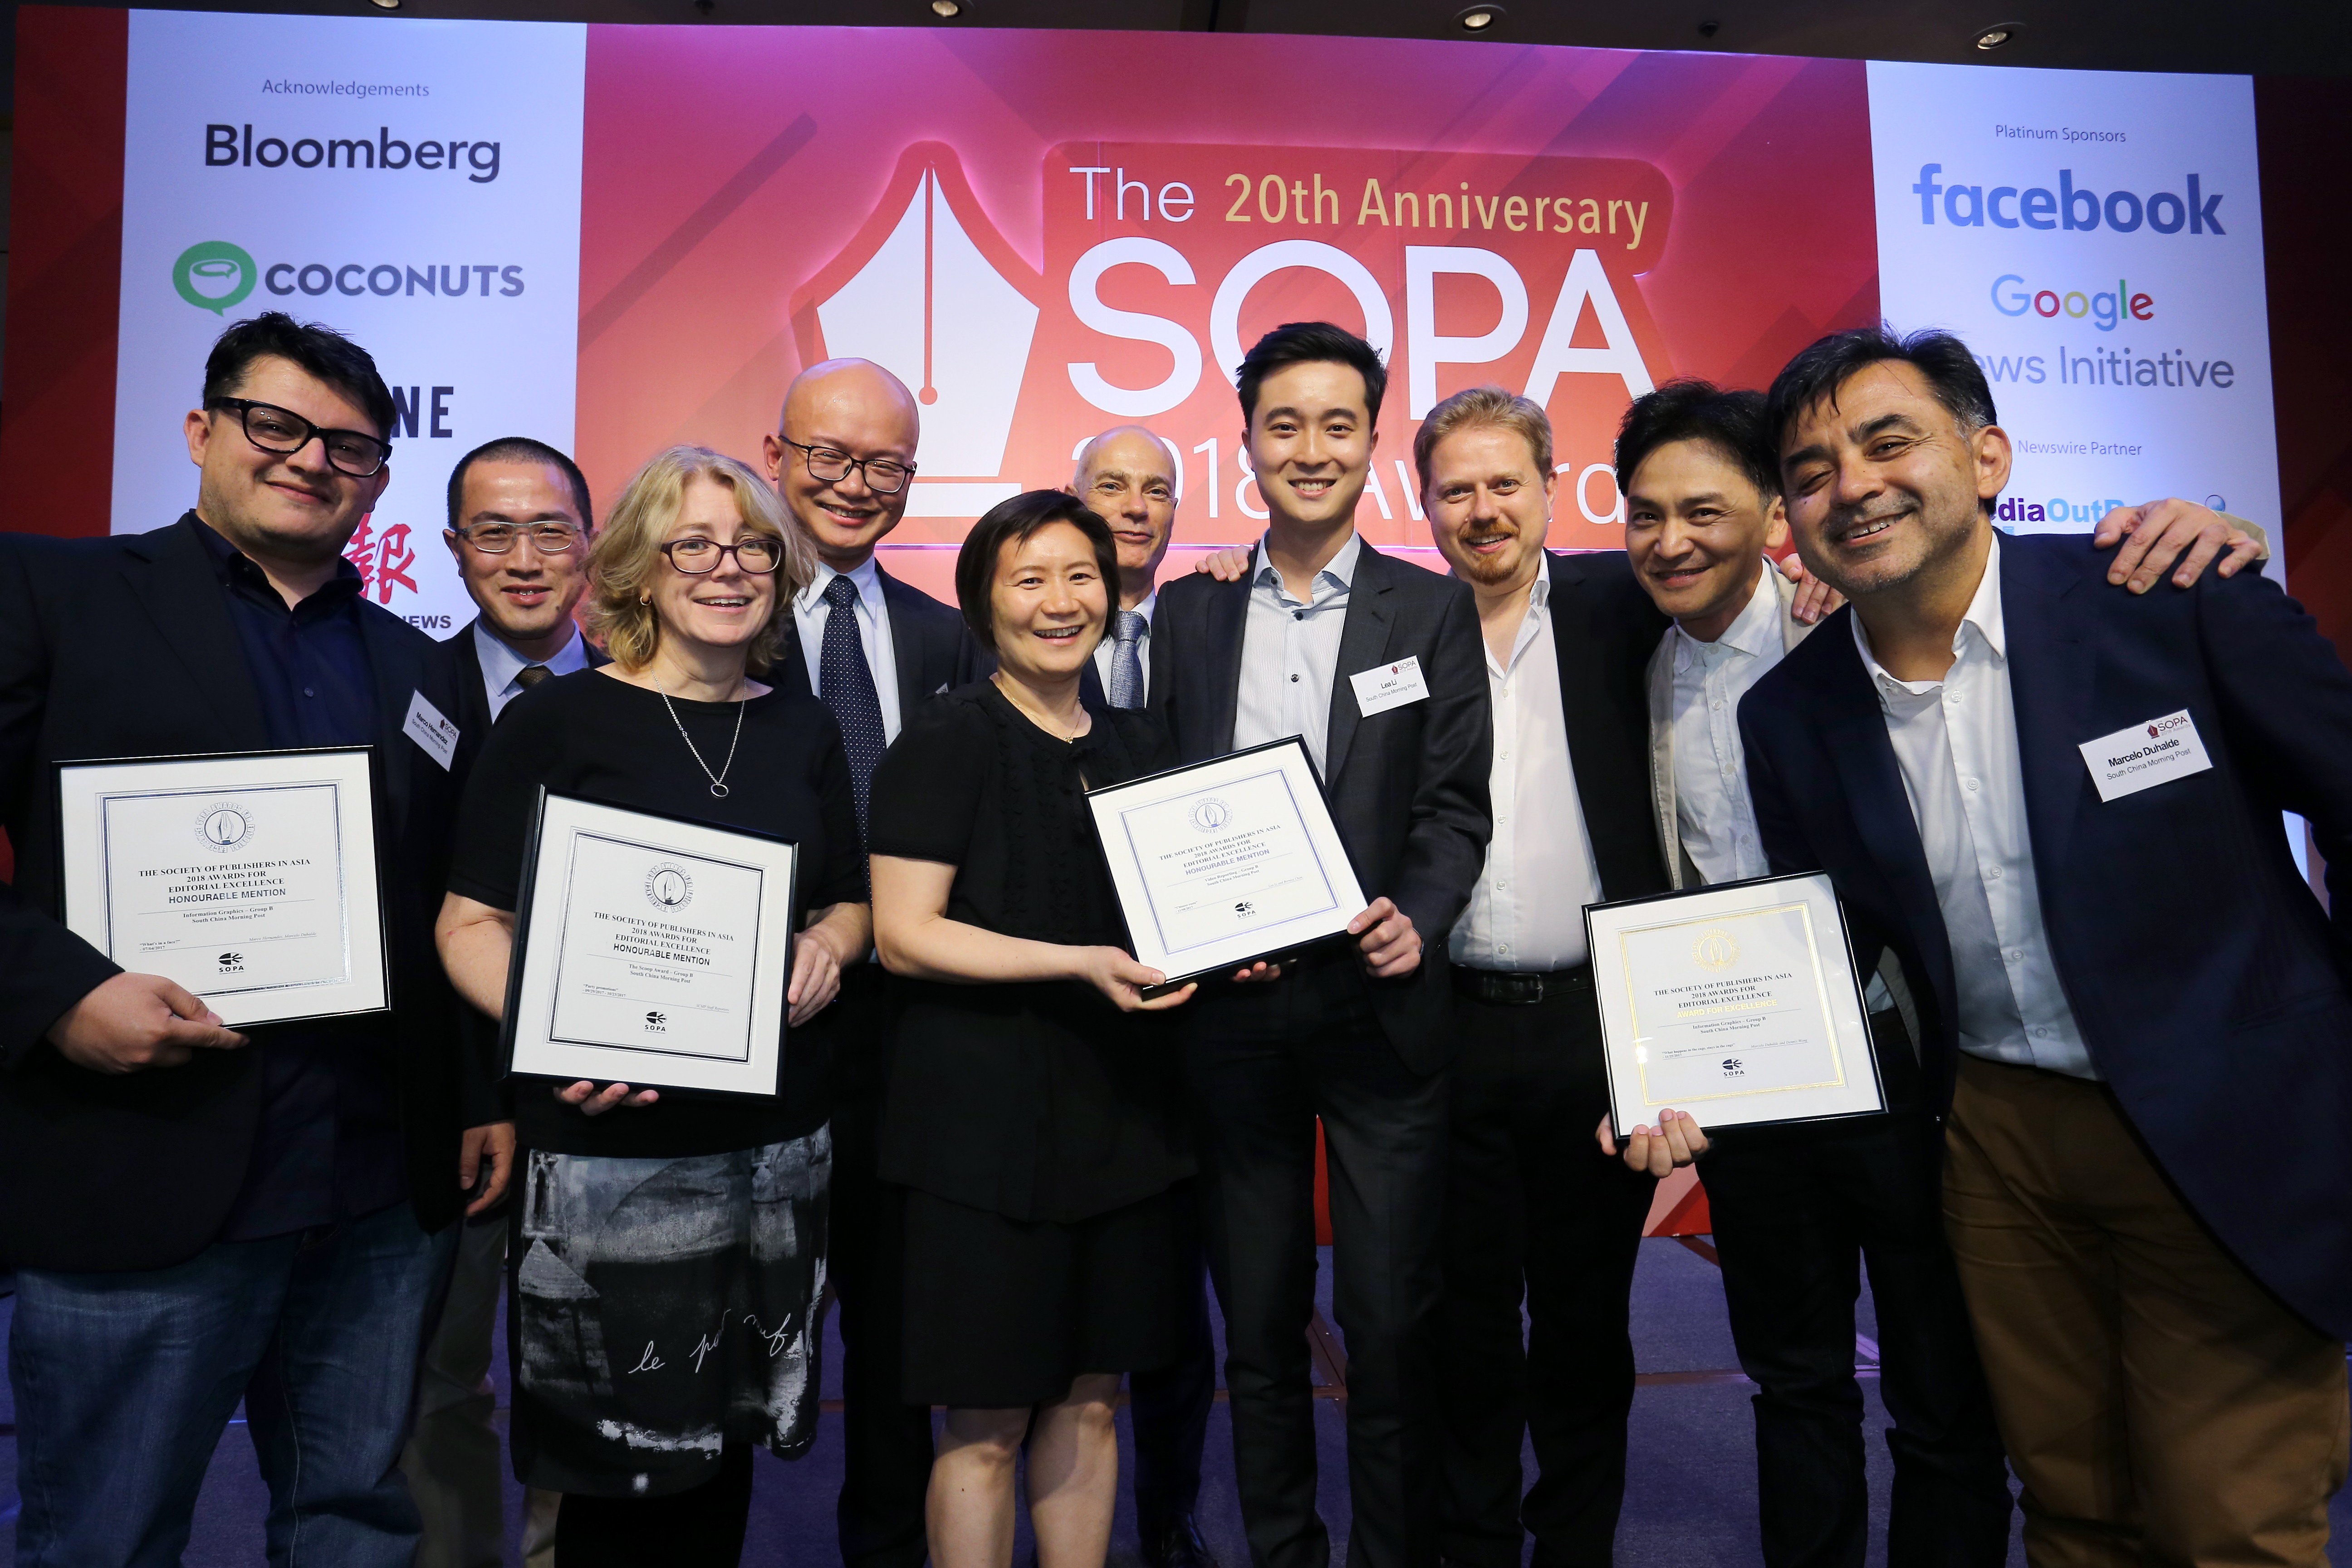 Staff from the South China Morning Post at the SOPA 2018 Awards. Photo: Dickson Lee